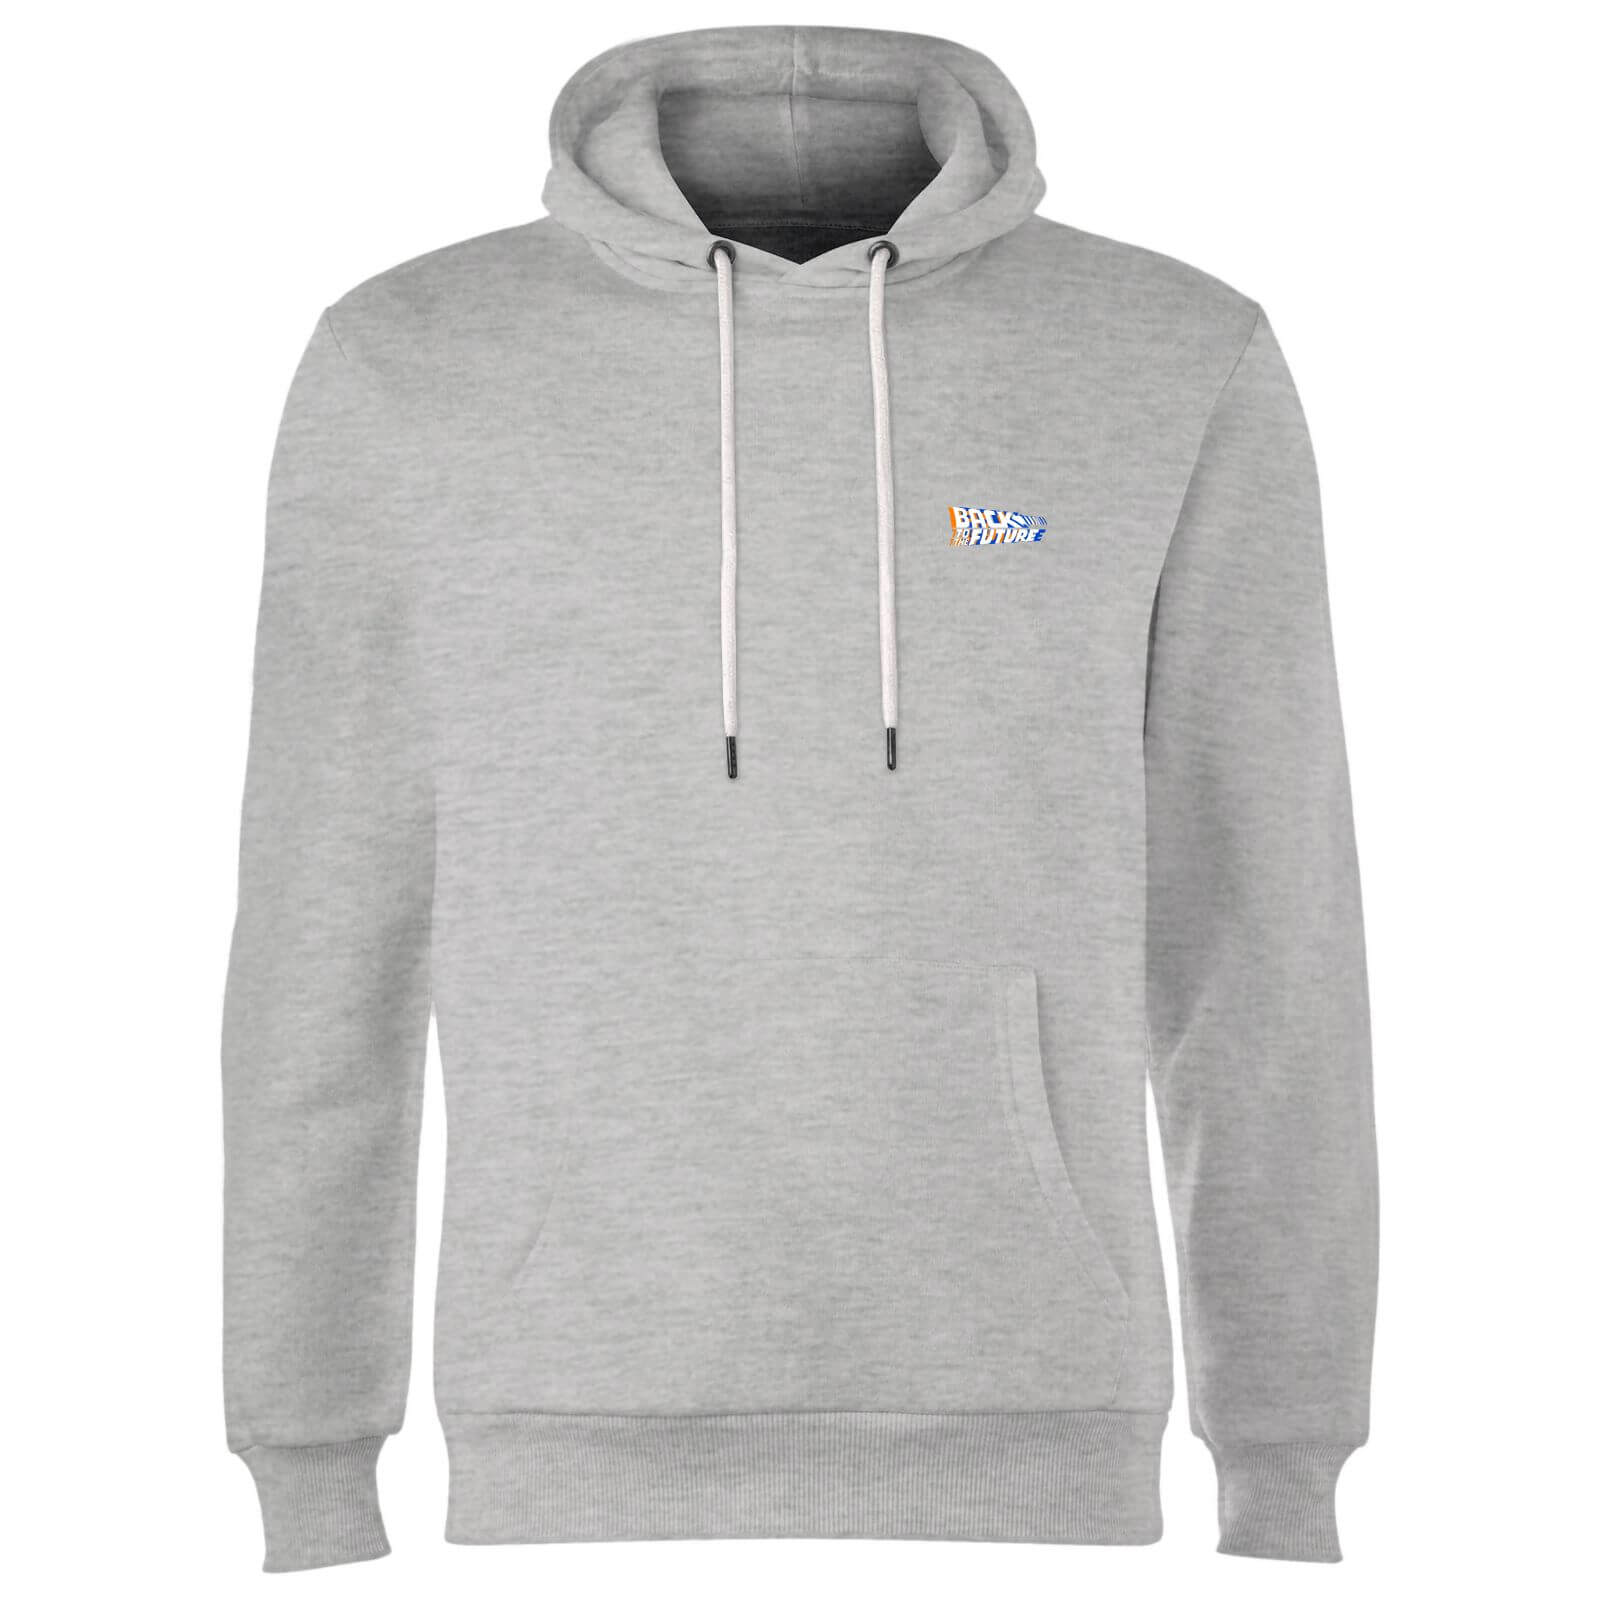 Back To The Future Hoodie - Grey - S - Grey